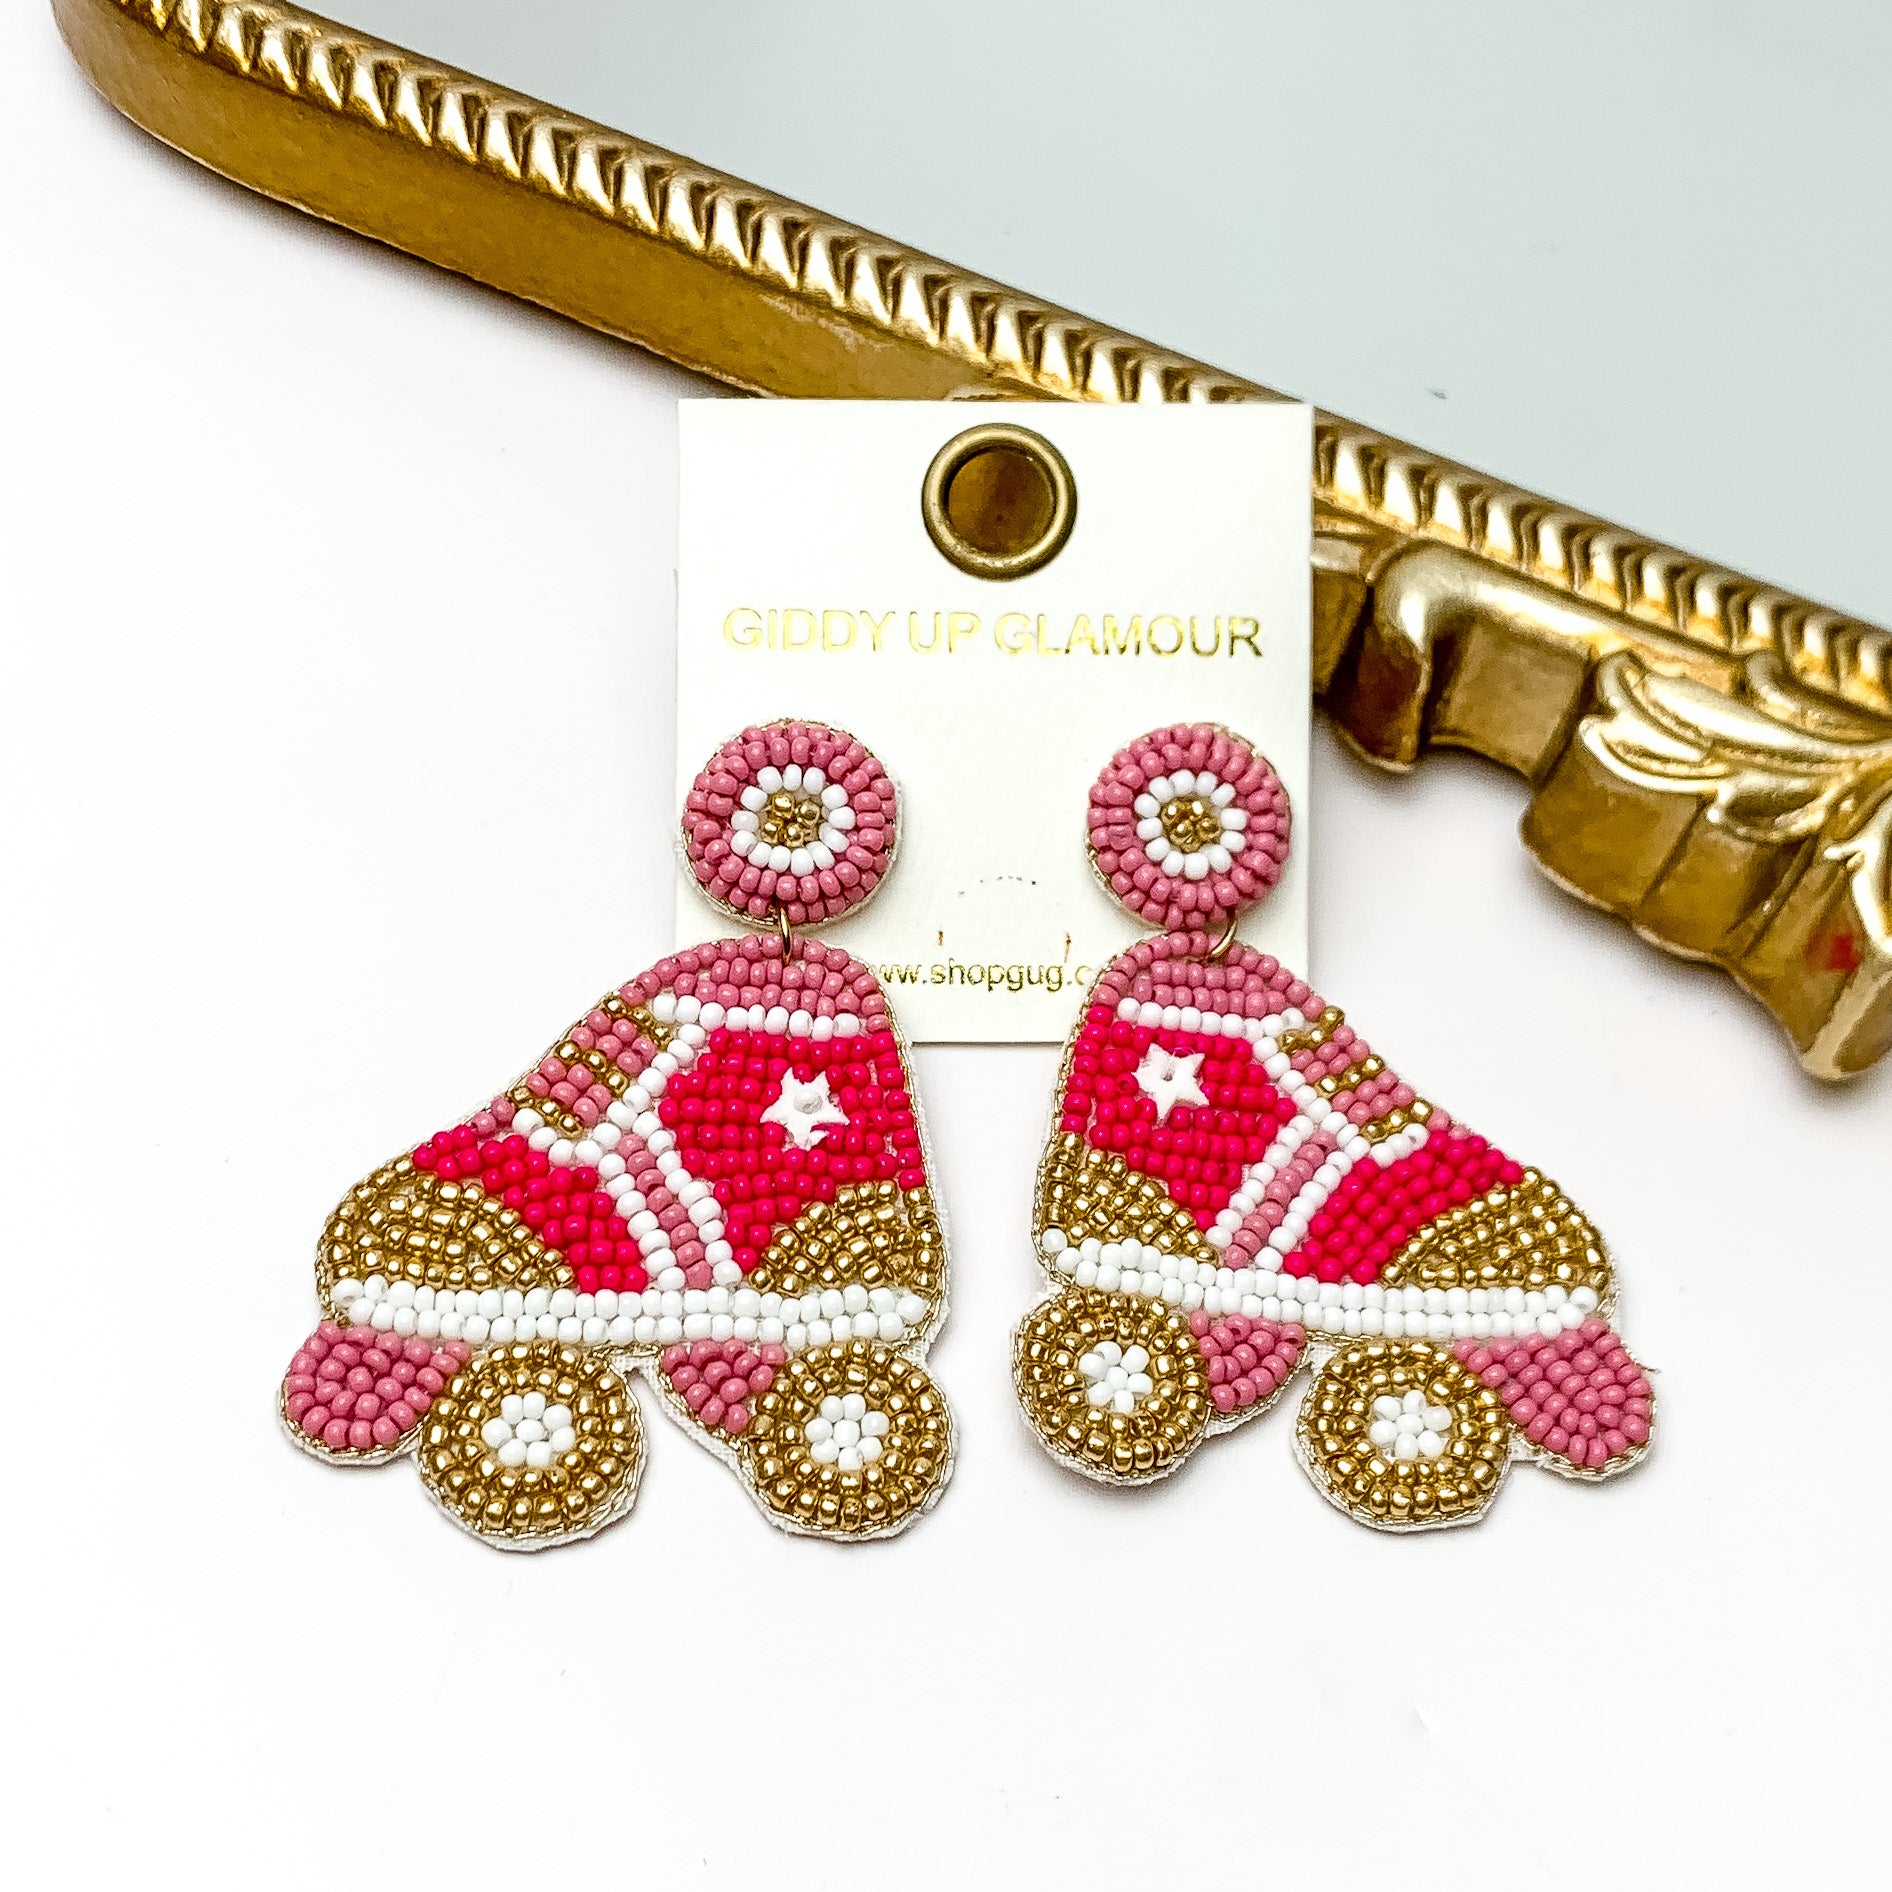 Roller Girl Beaded Roller Skate Earrings in Pink. Pictured on a white background with the earrings laying against a mirror with a gold trim.